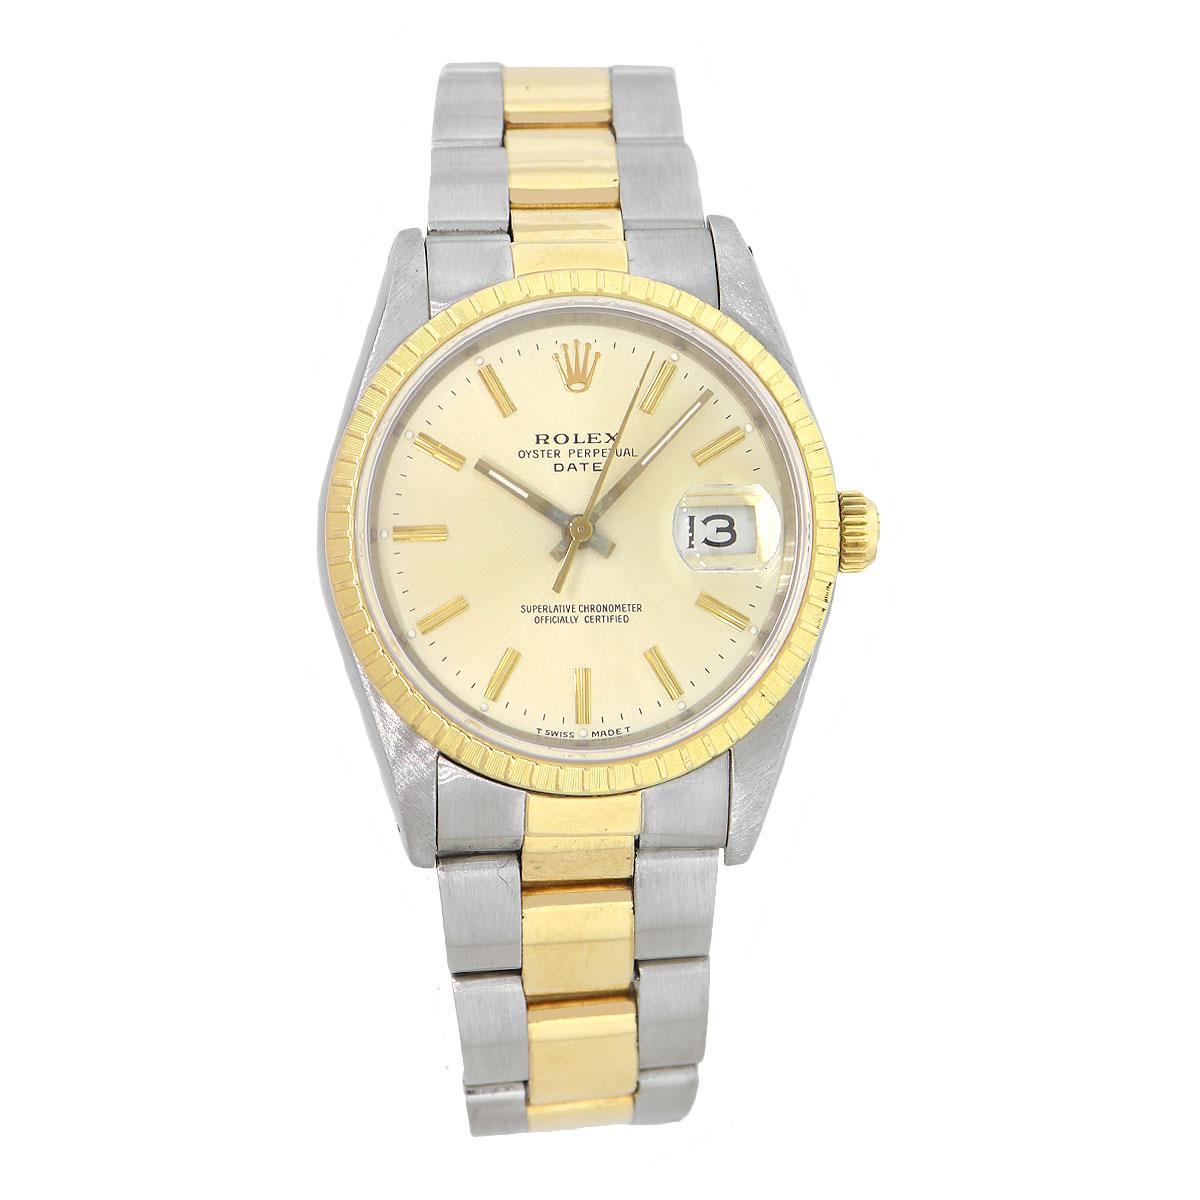 Brand: Rolex
Model: Date
Reference Number: 15223
Serial: “L”
Case Material: Stainless Steel
Dial: Champagne Dial with golden stick markers and hands. Date is located at 3 O’Clock.
Bezel: 18k Yellow Gold, Engine Turned Fixed Bezel
Case Measurements: